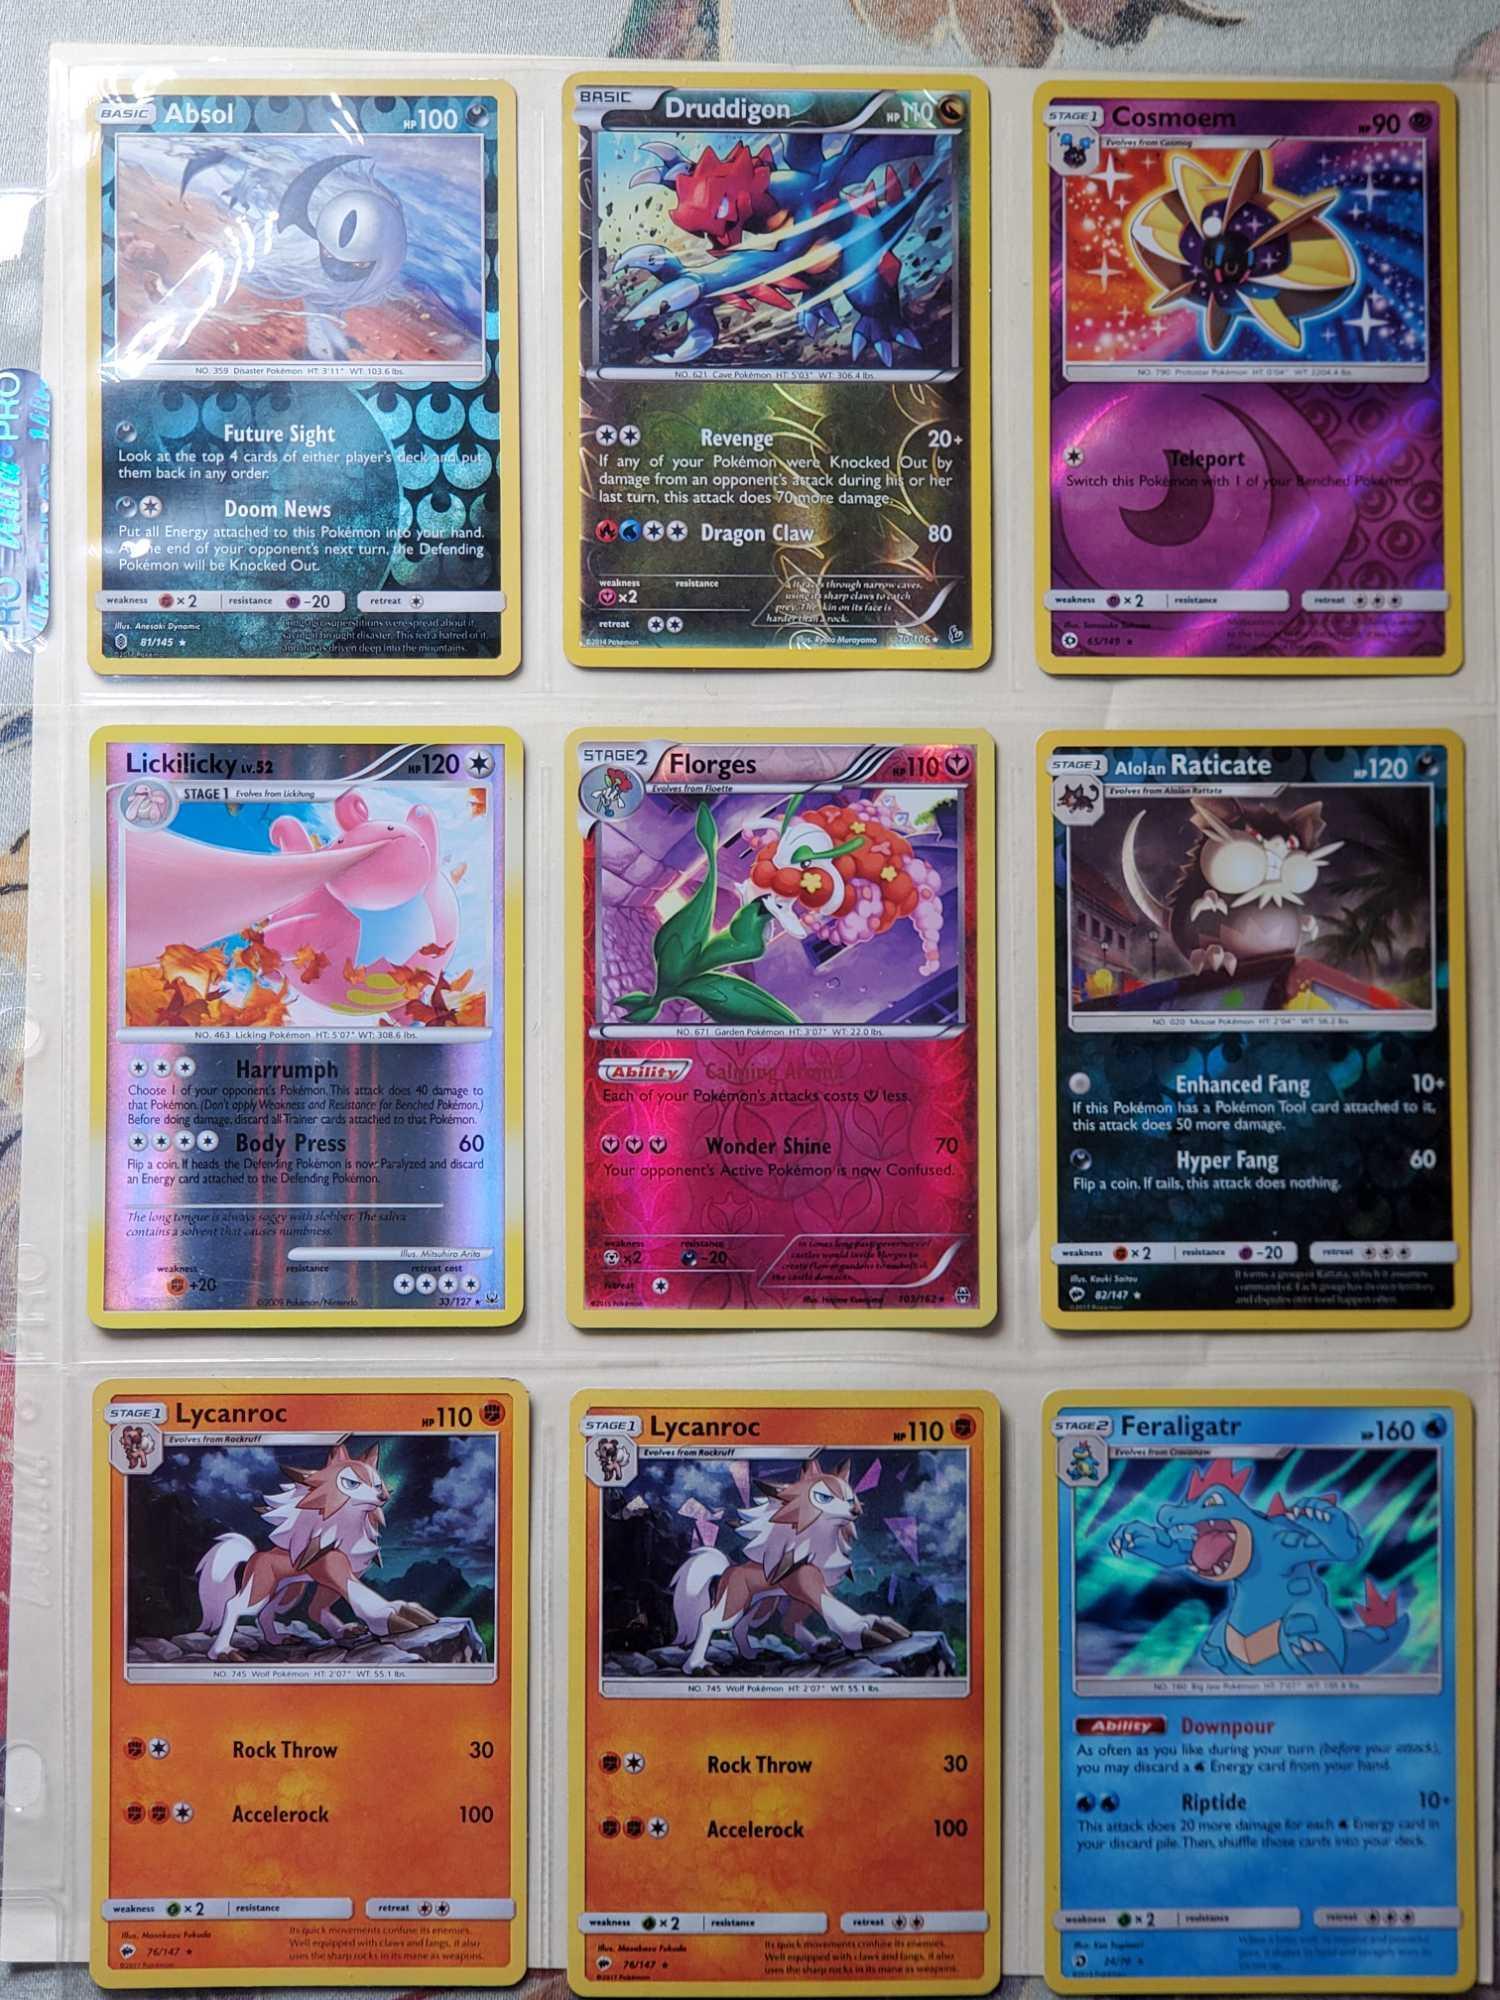 39 First Edition, 2 World Championship Signed, 1 Pocket Monster Card, and 34 Pokemon Marbles